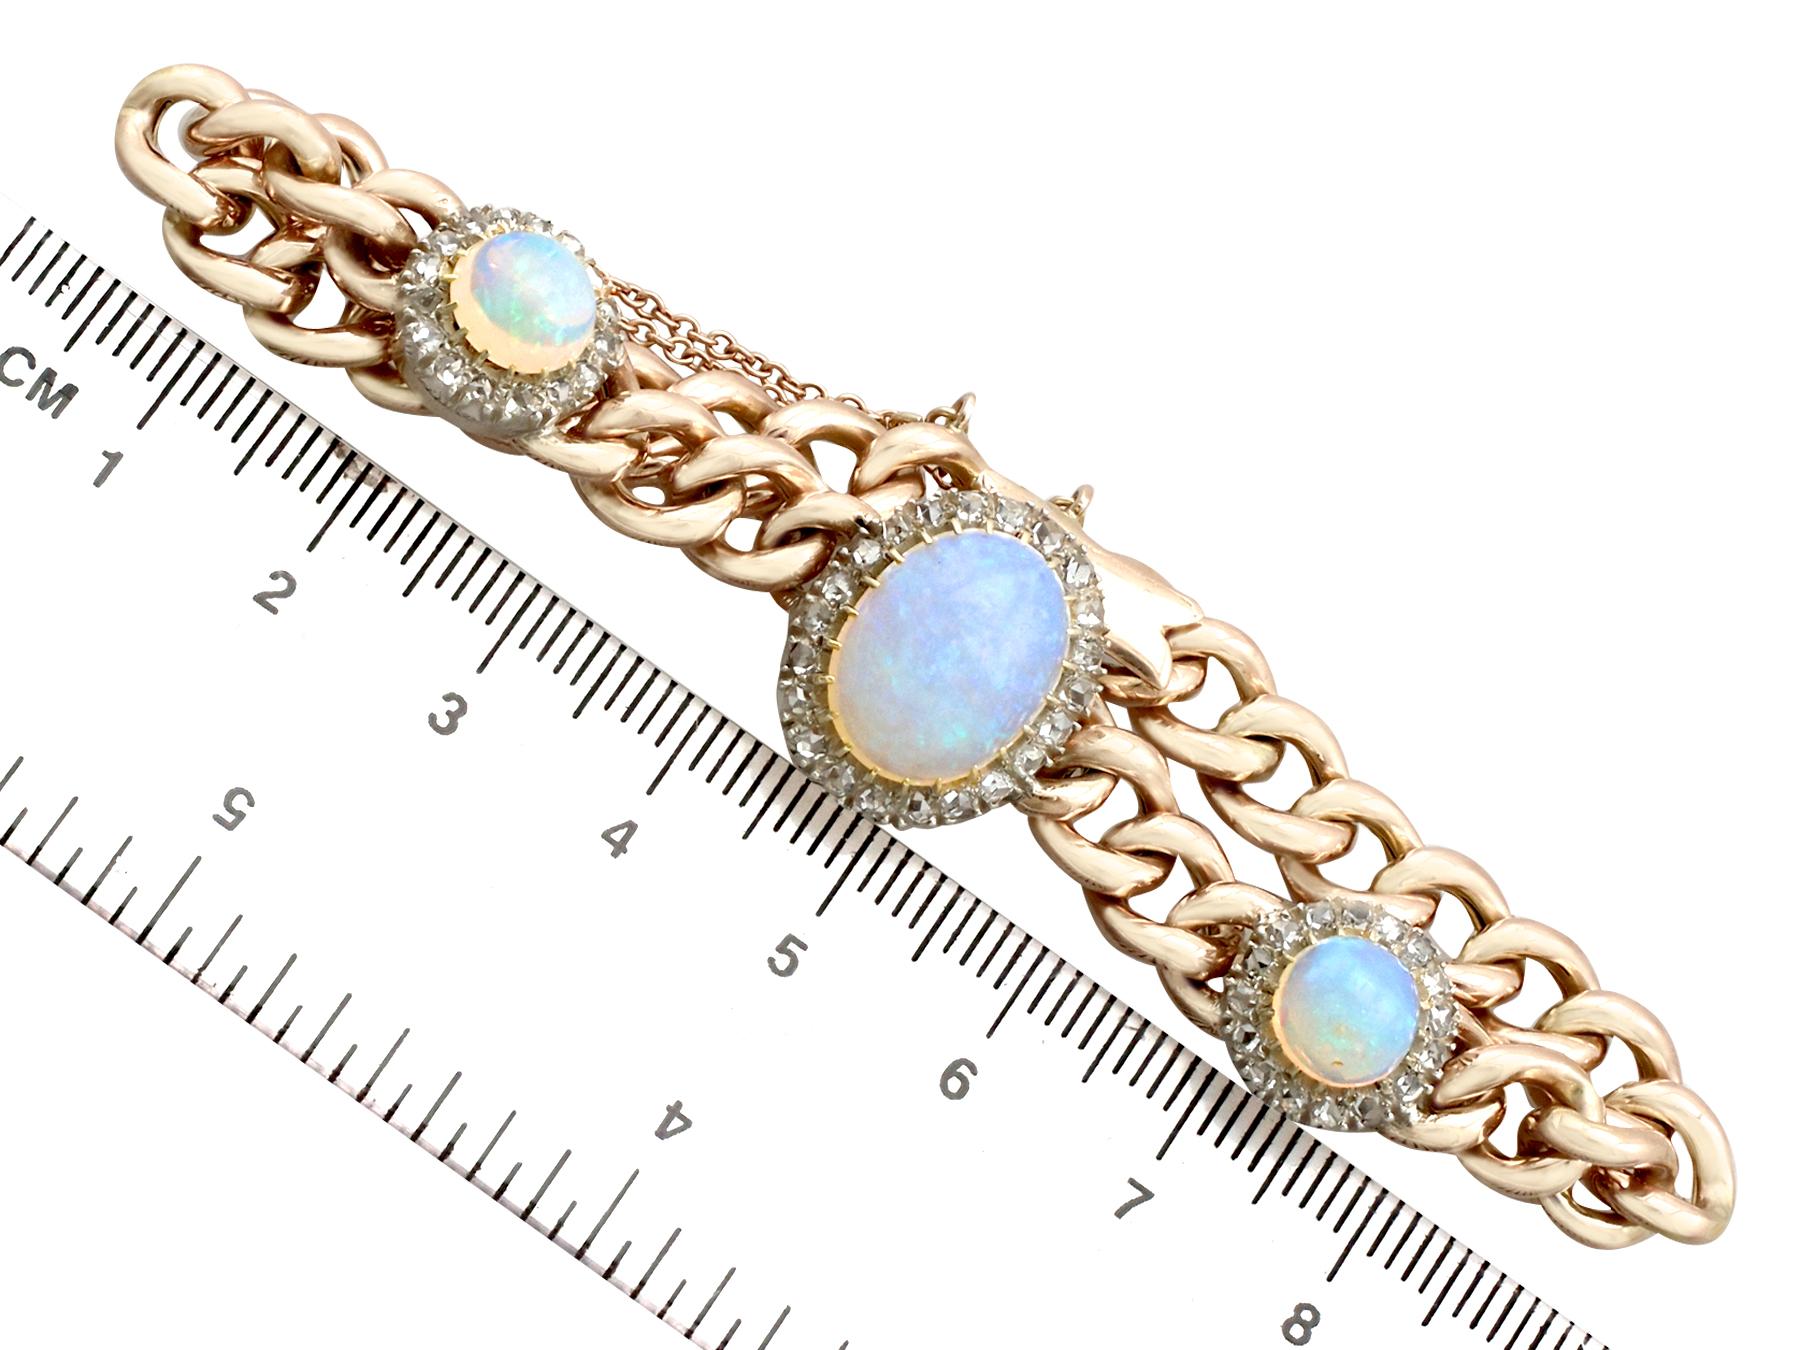 Victorian 3.83ct White Opal and 1.12ct Diamond Yellow Gold Bracelet In Excellent Condition For Sale In Jesmond, Newcastle Upon Tyne